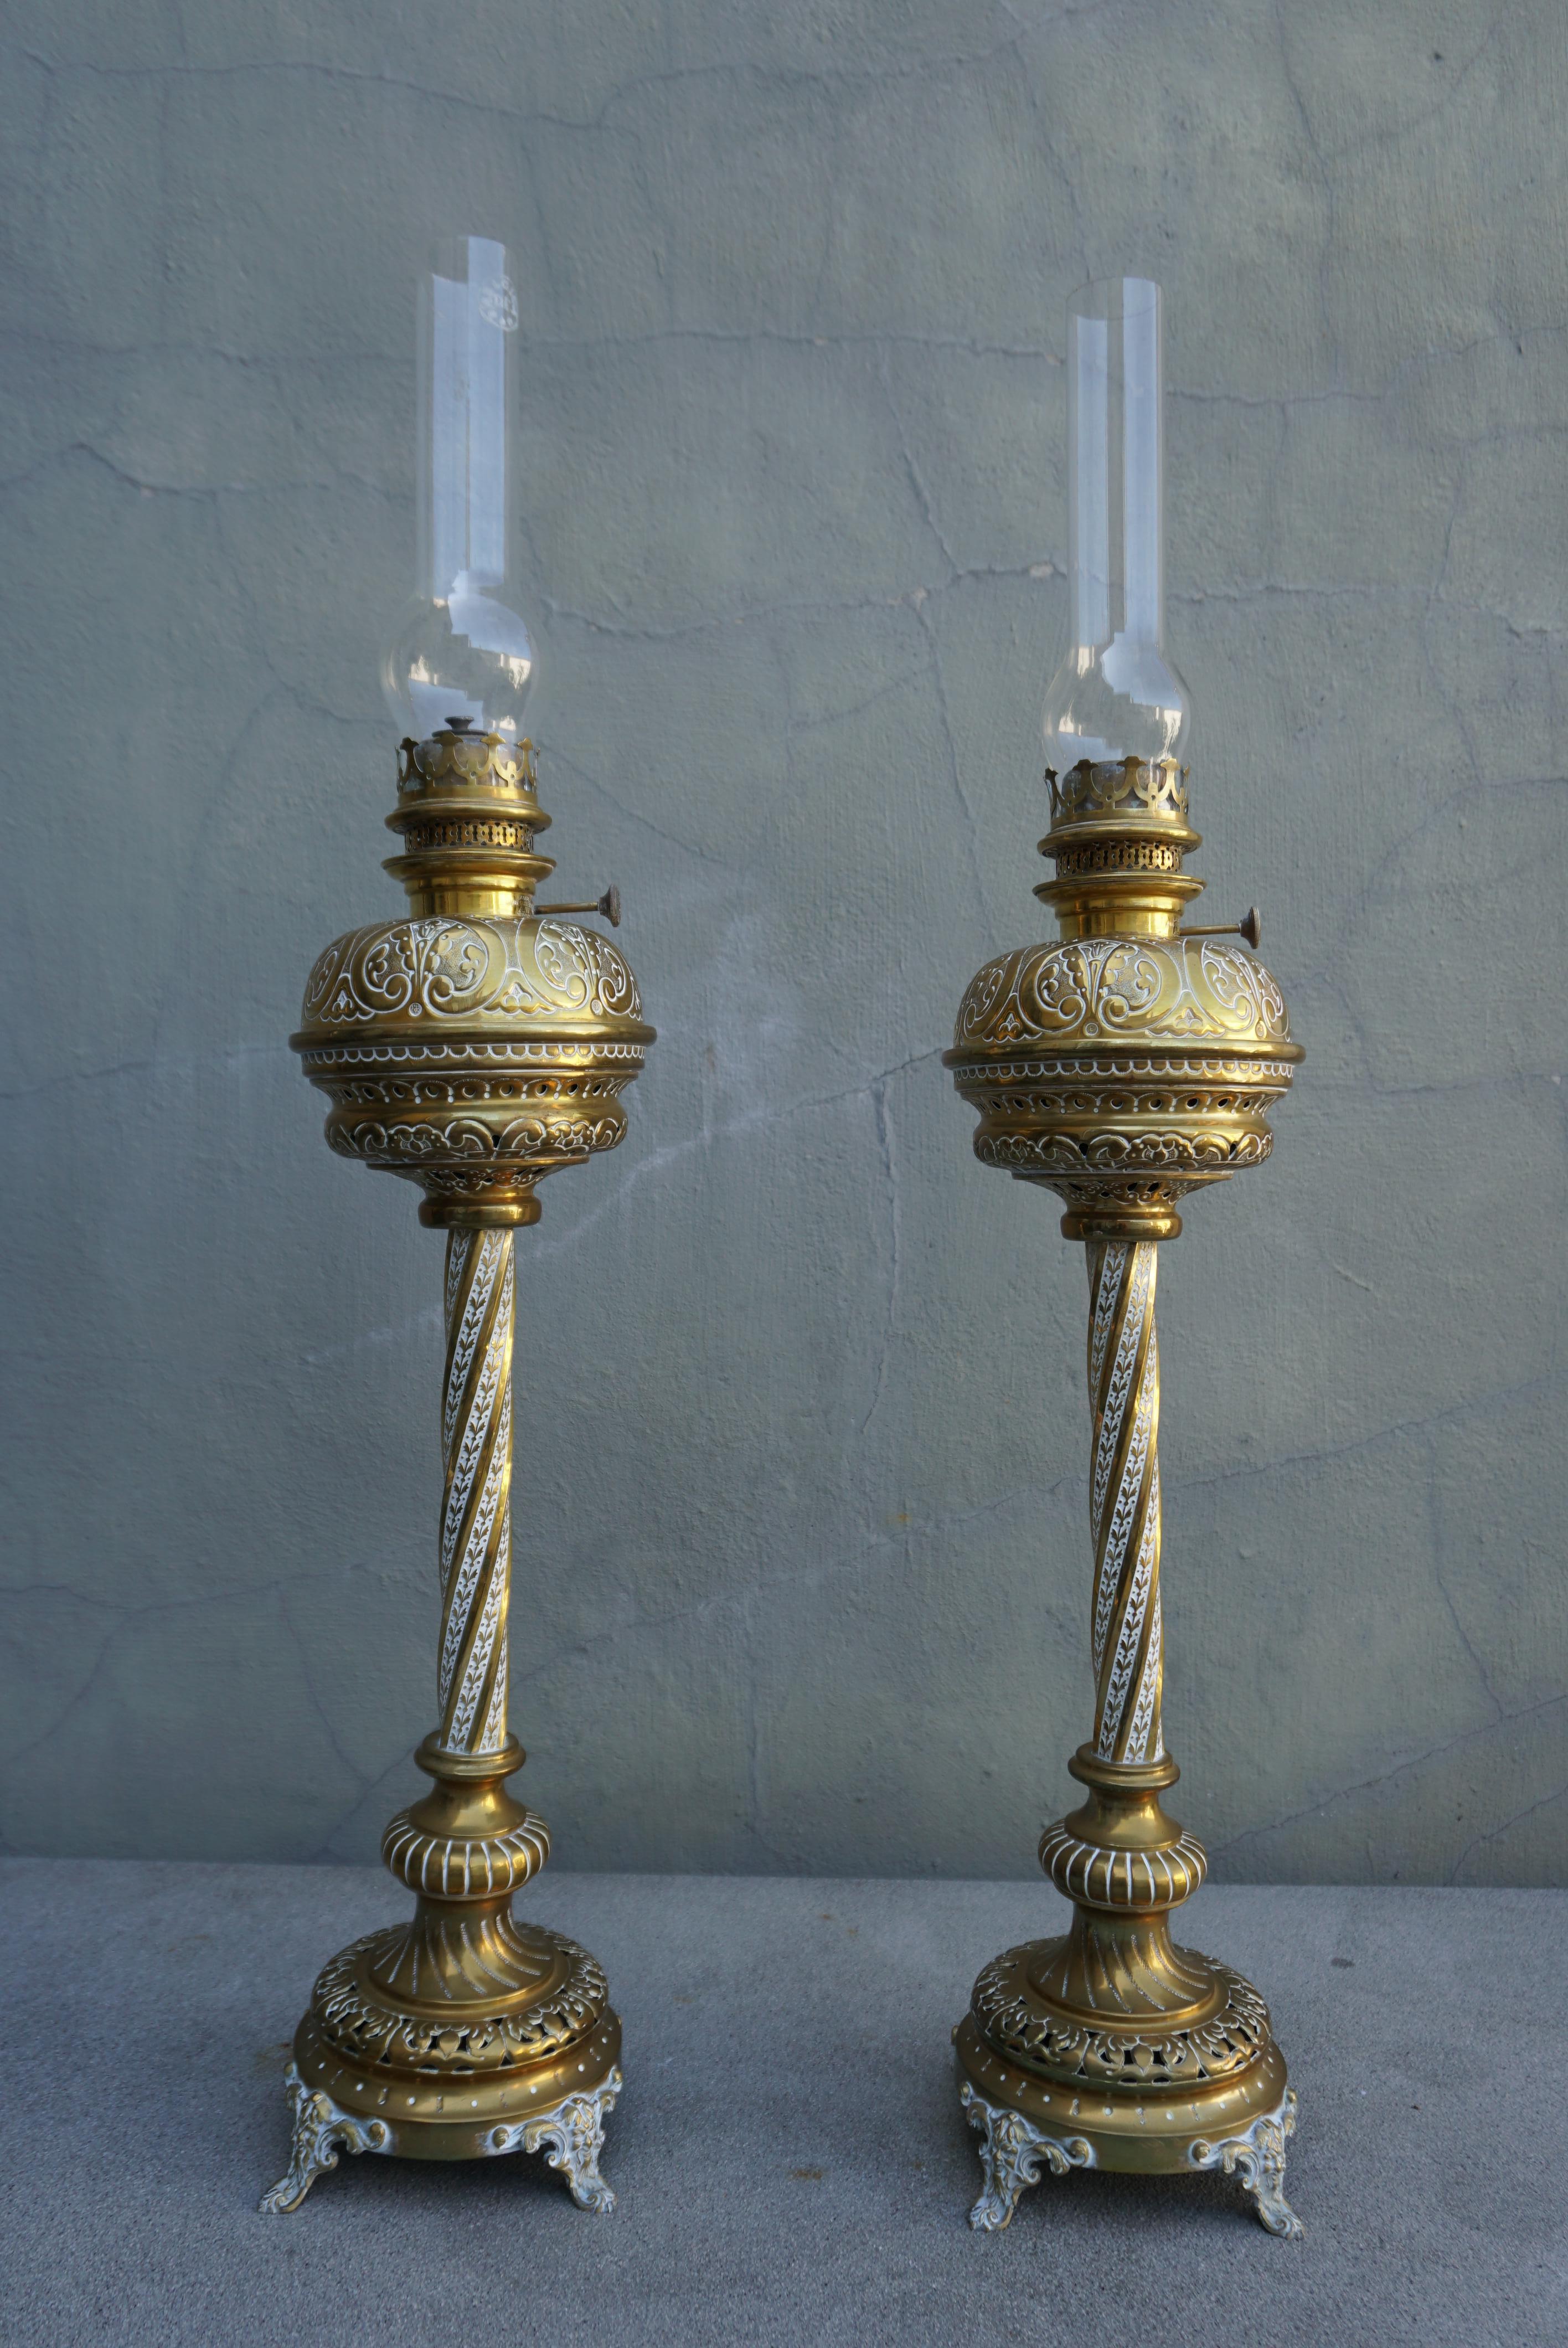 A pair of antique Victorian column brass oil lamps made in Belgium.
Comes with a glass shade.The designer lamp is made in a classic style, the body-capacity of the lamp is made of beautiful handmade brass.There is a stamp on the brass base and on